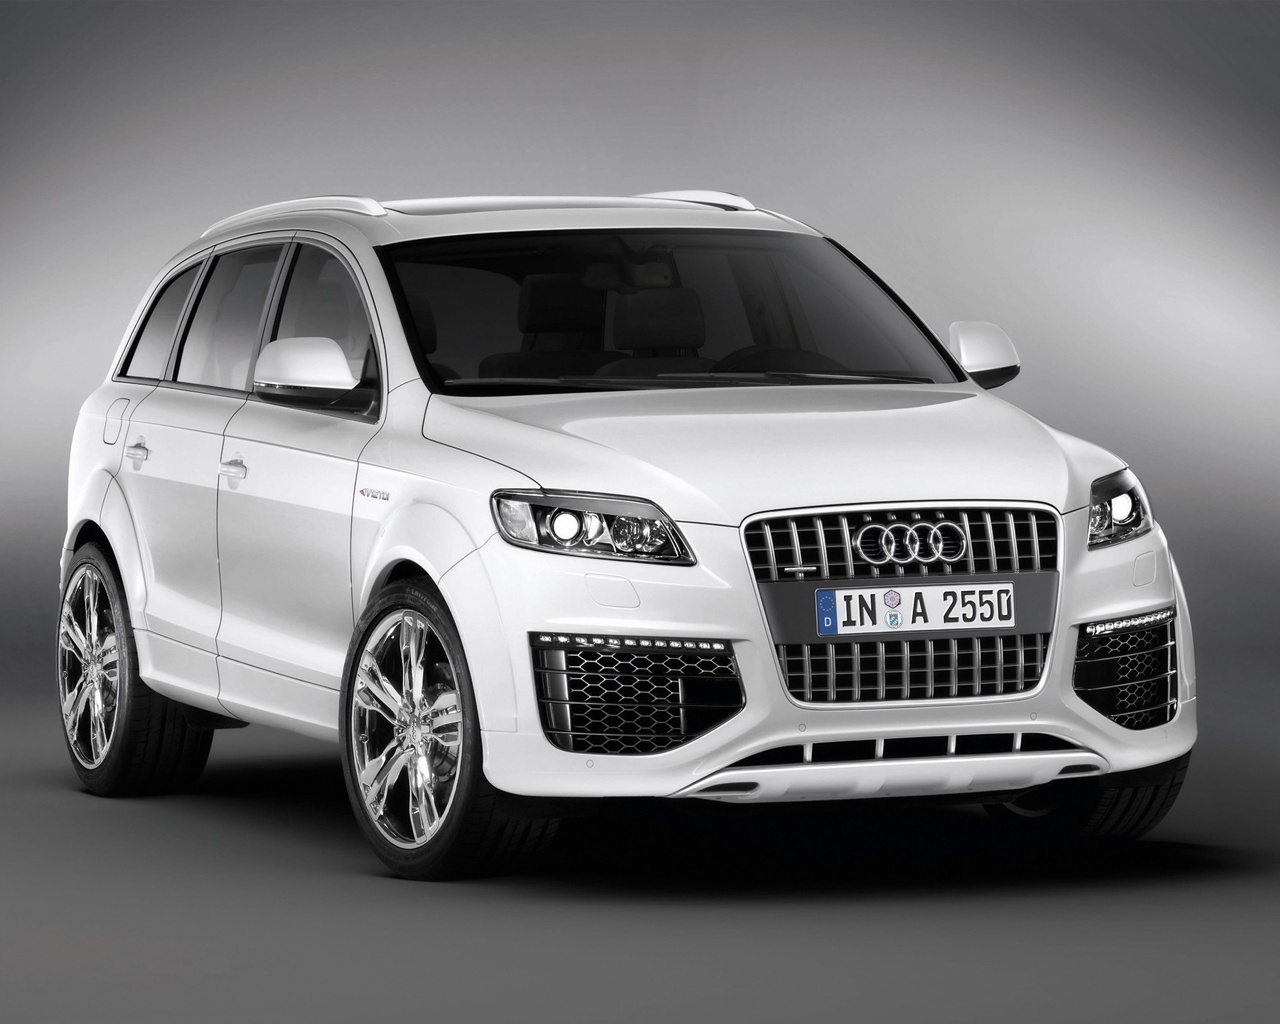 Audi Q7 Coastline front and side for 1280 x 1024 resolution